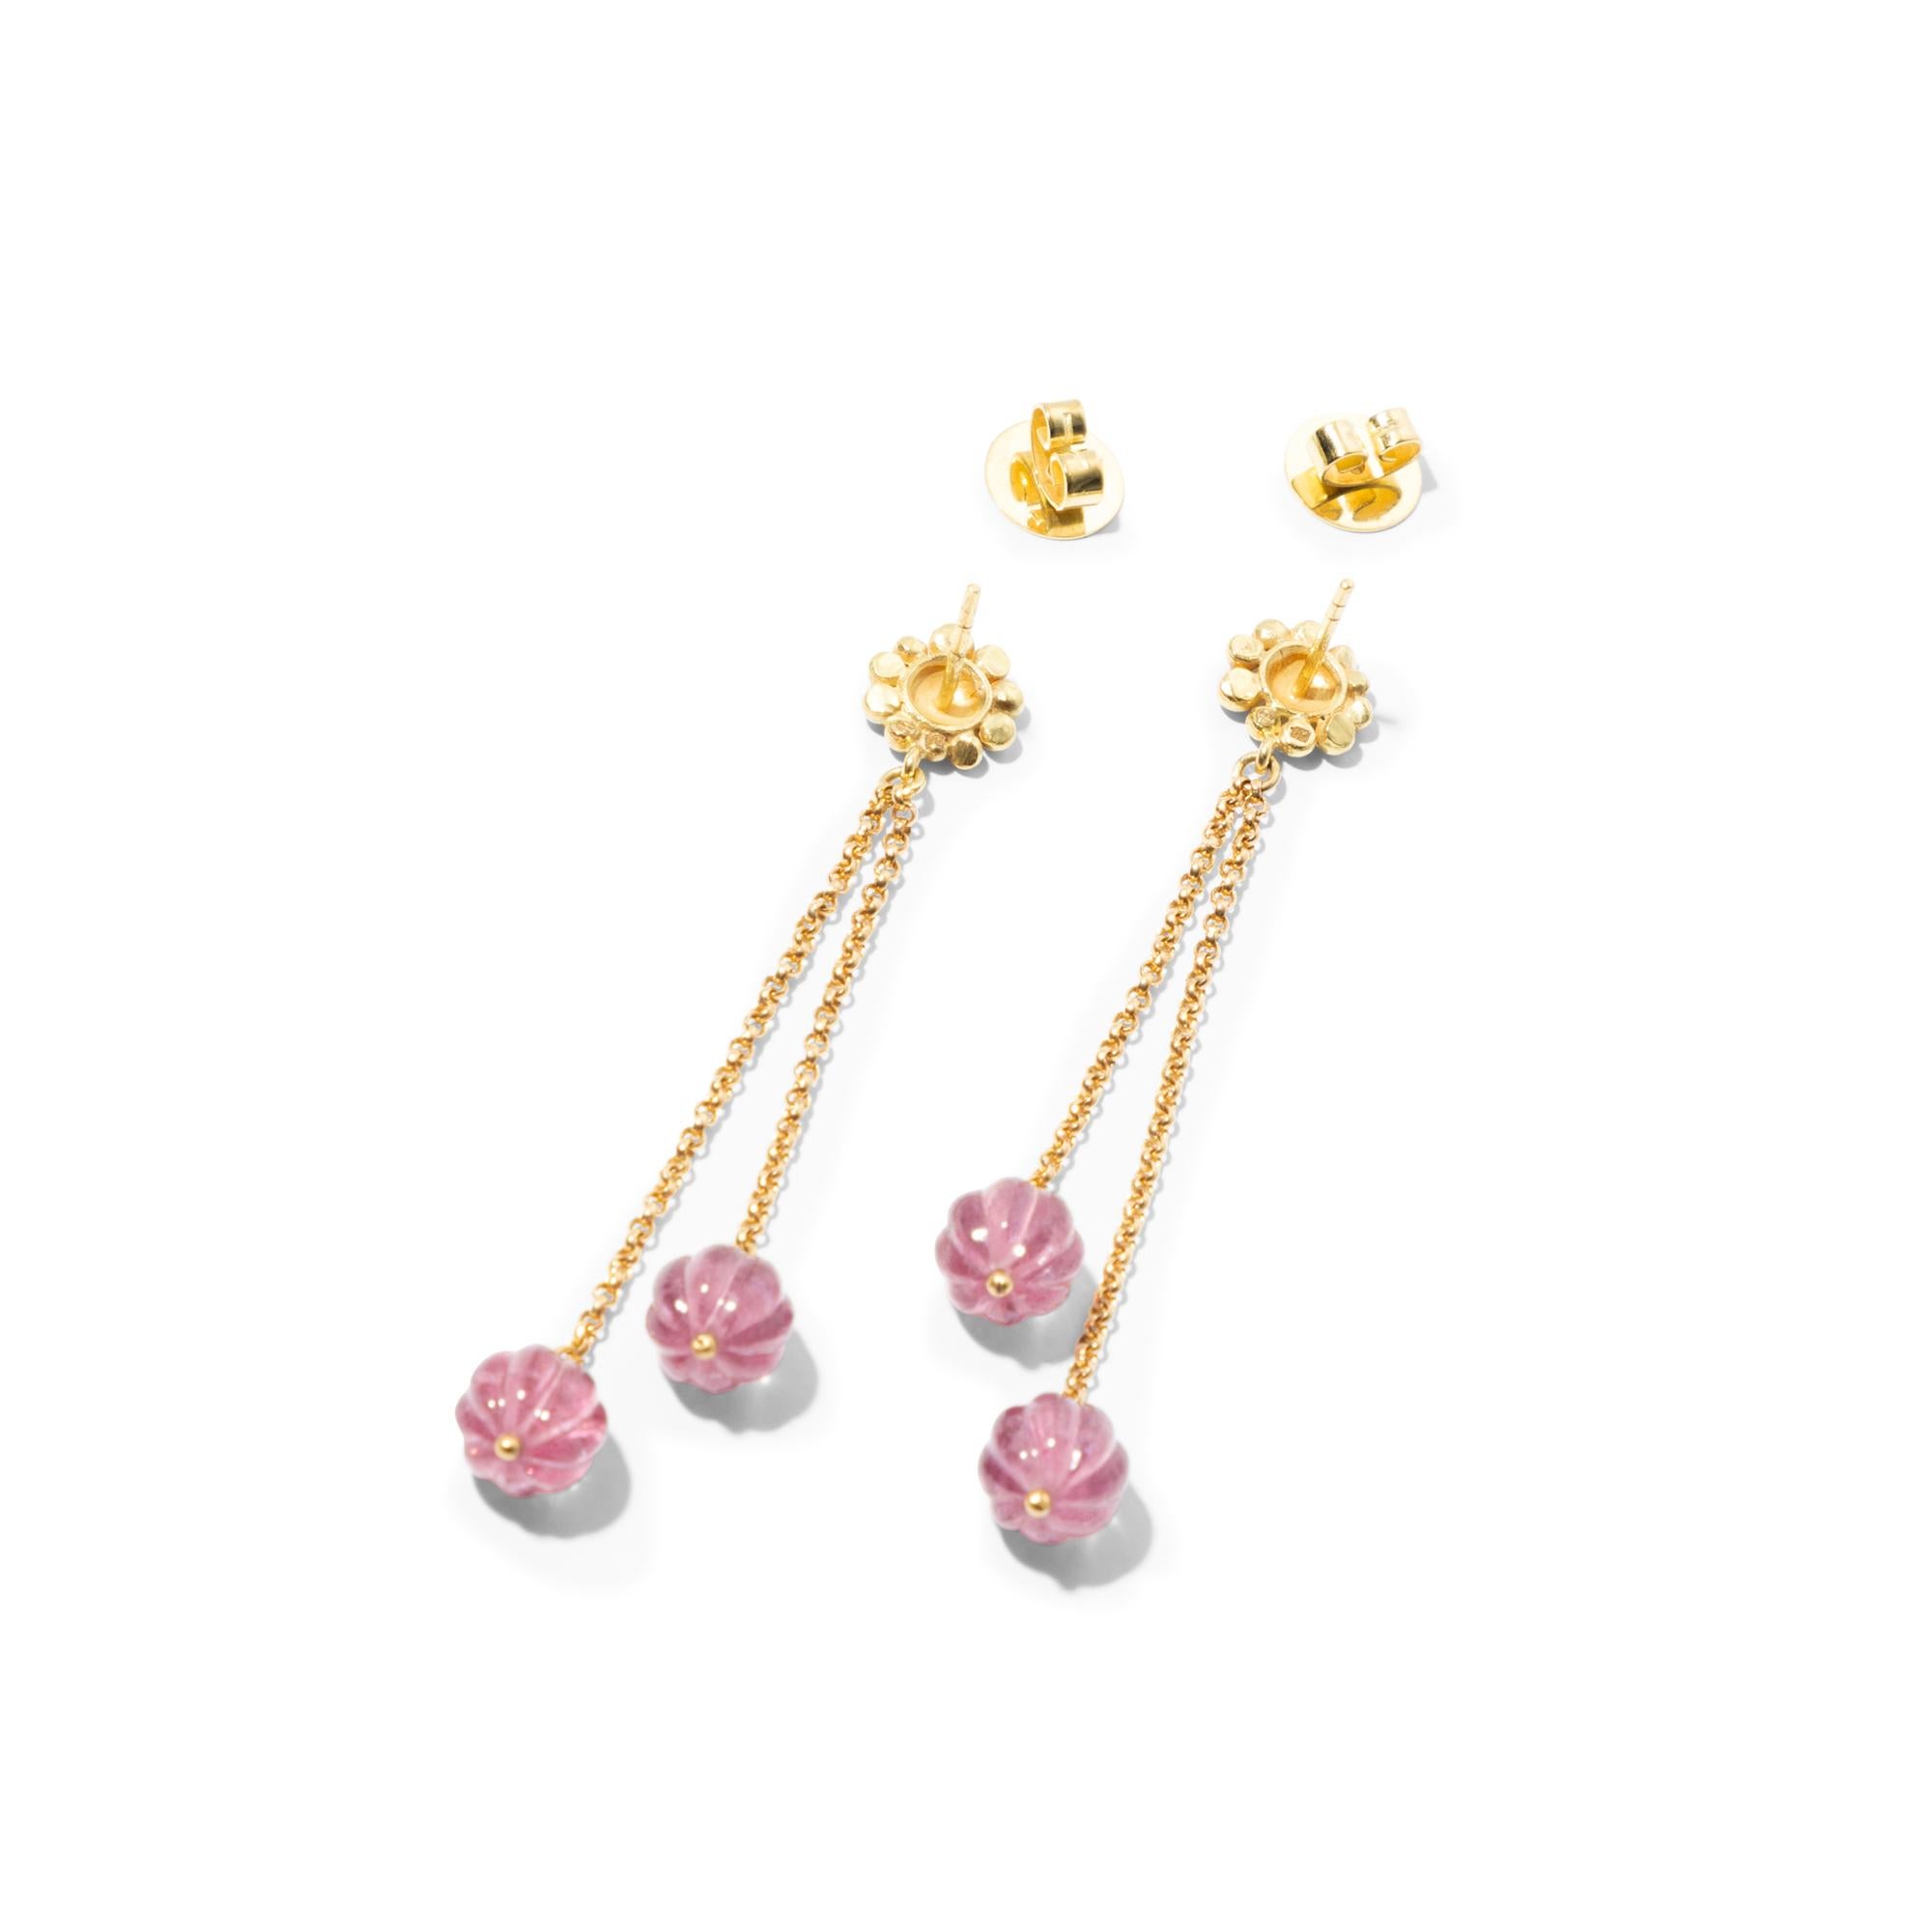 Artisan 18k Gold Drop Earrings with Vivid Pink Tourmaline Beads on a Gold Chain For Sale